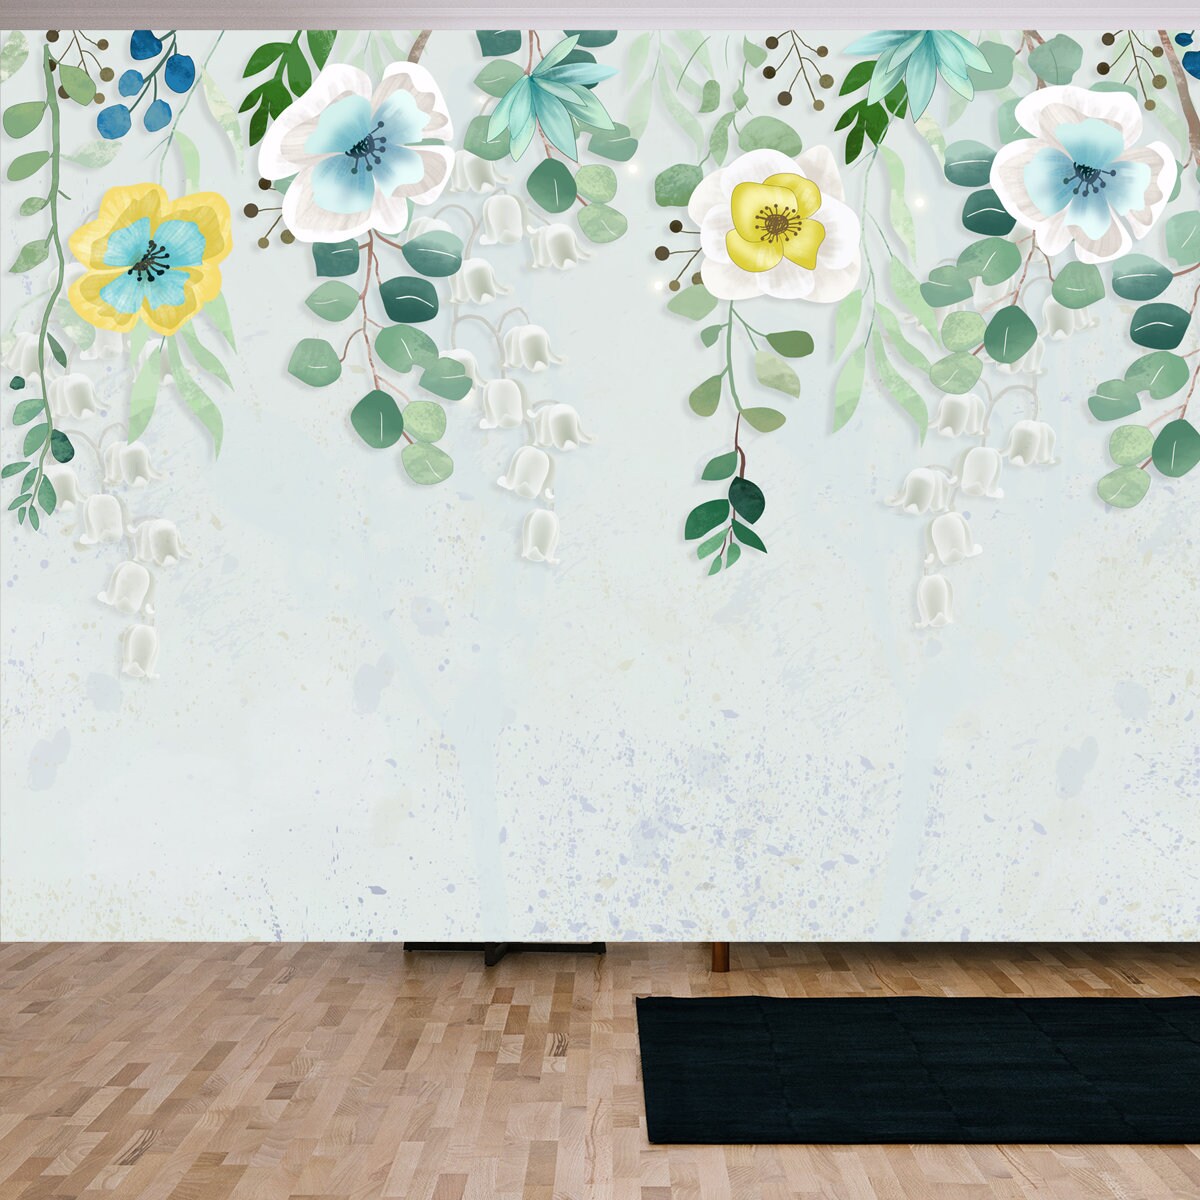 3d Illustration, Fabulous Multi-Colored Flowers Hanging from the Top of a Light Wall Wallpaper Living Room Mural